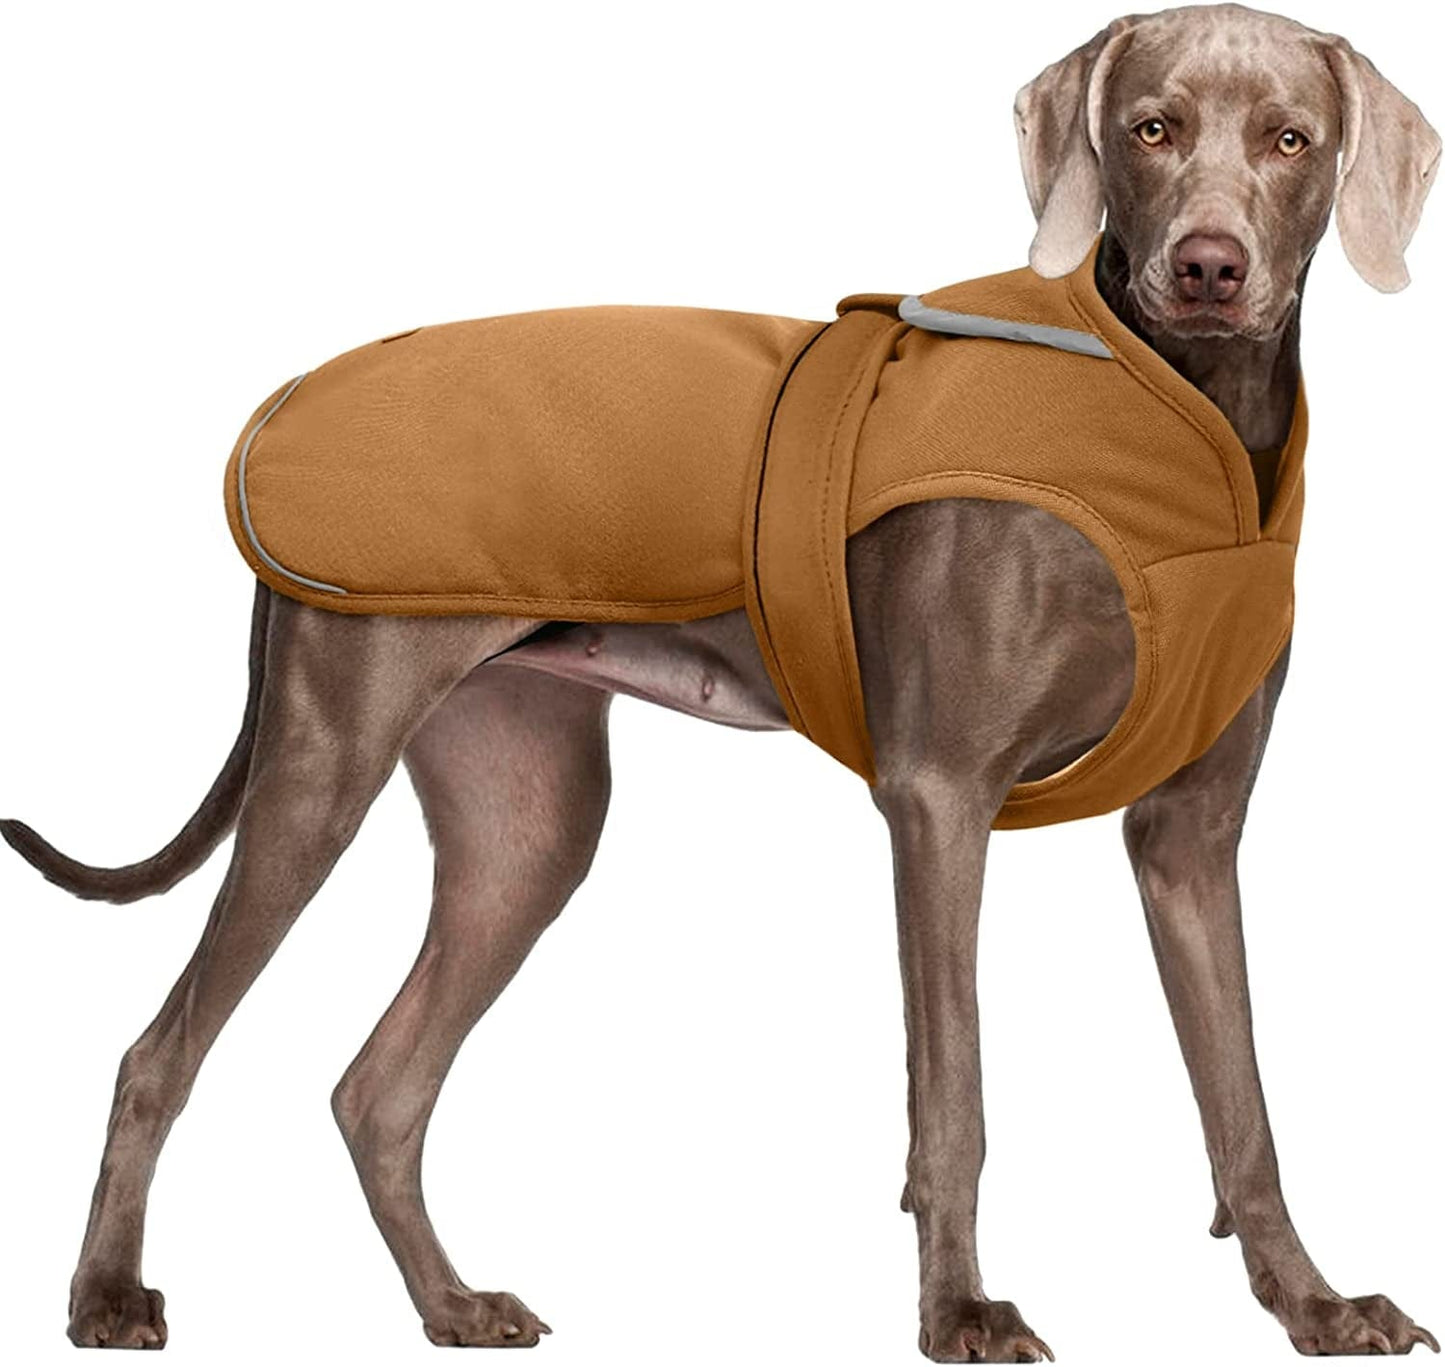 Kuoser Canvas Dog Winter Coat, Warm Dog Jacket Reflective Fleece Dog Cold Weather Coat Warm Doggie Clothes Waterproof Dog Vest with Zipper Leash Hole for Small Medium Large Dogs